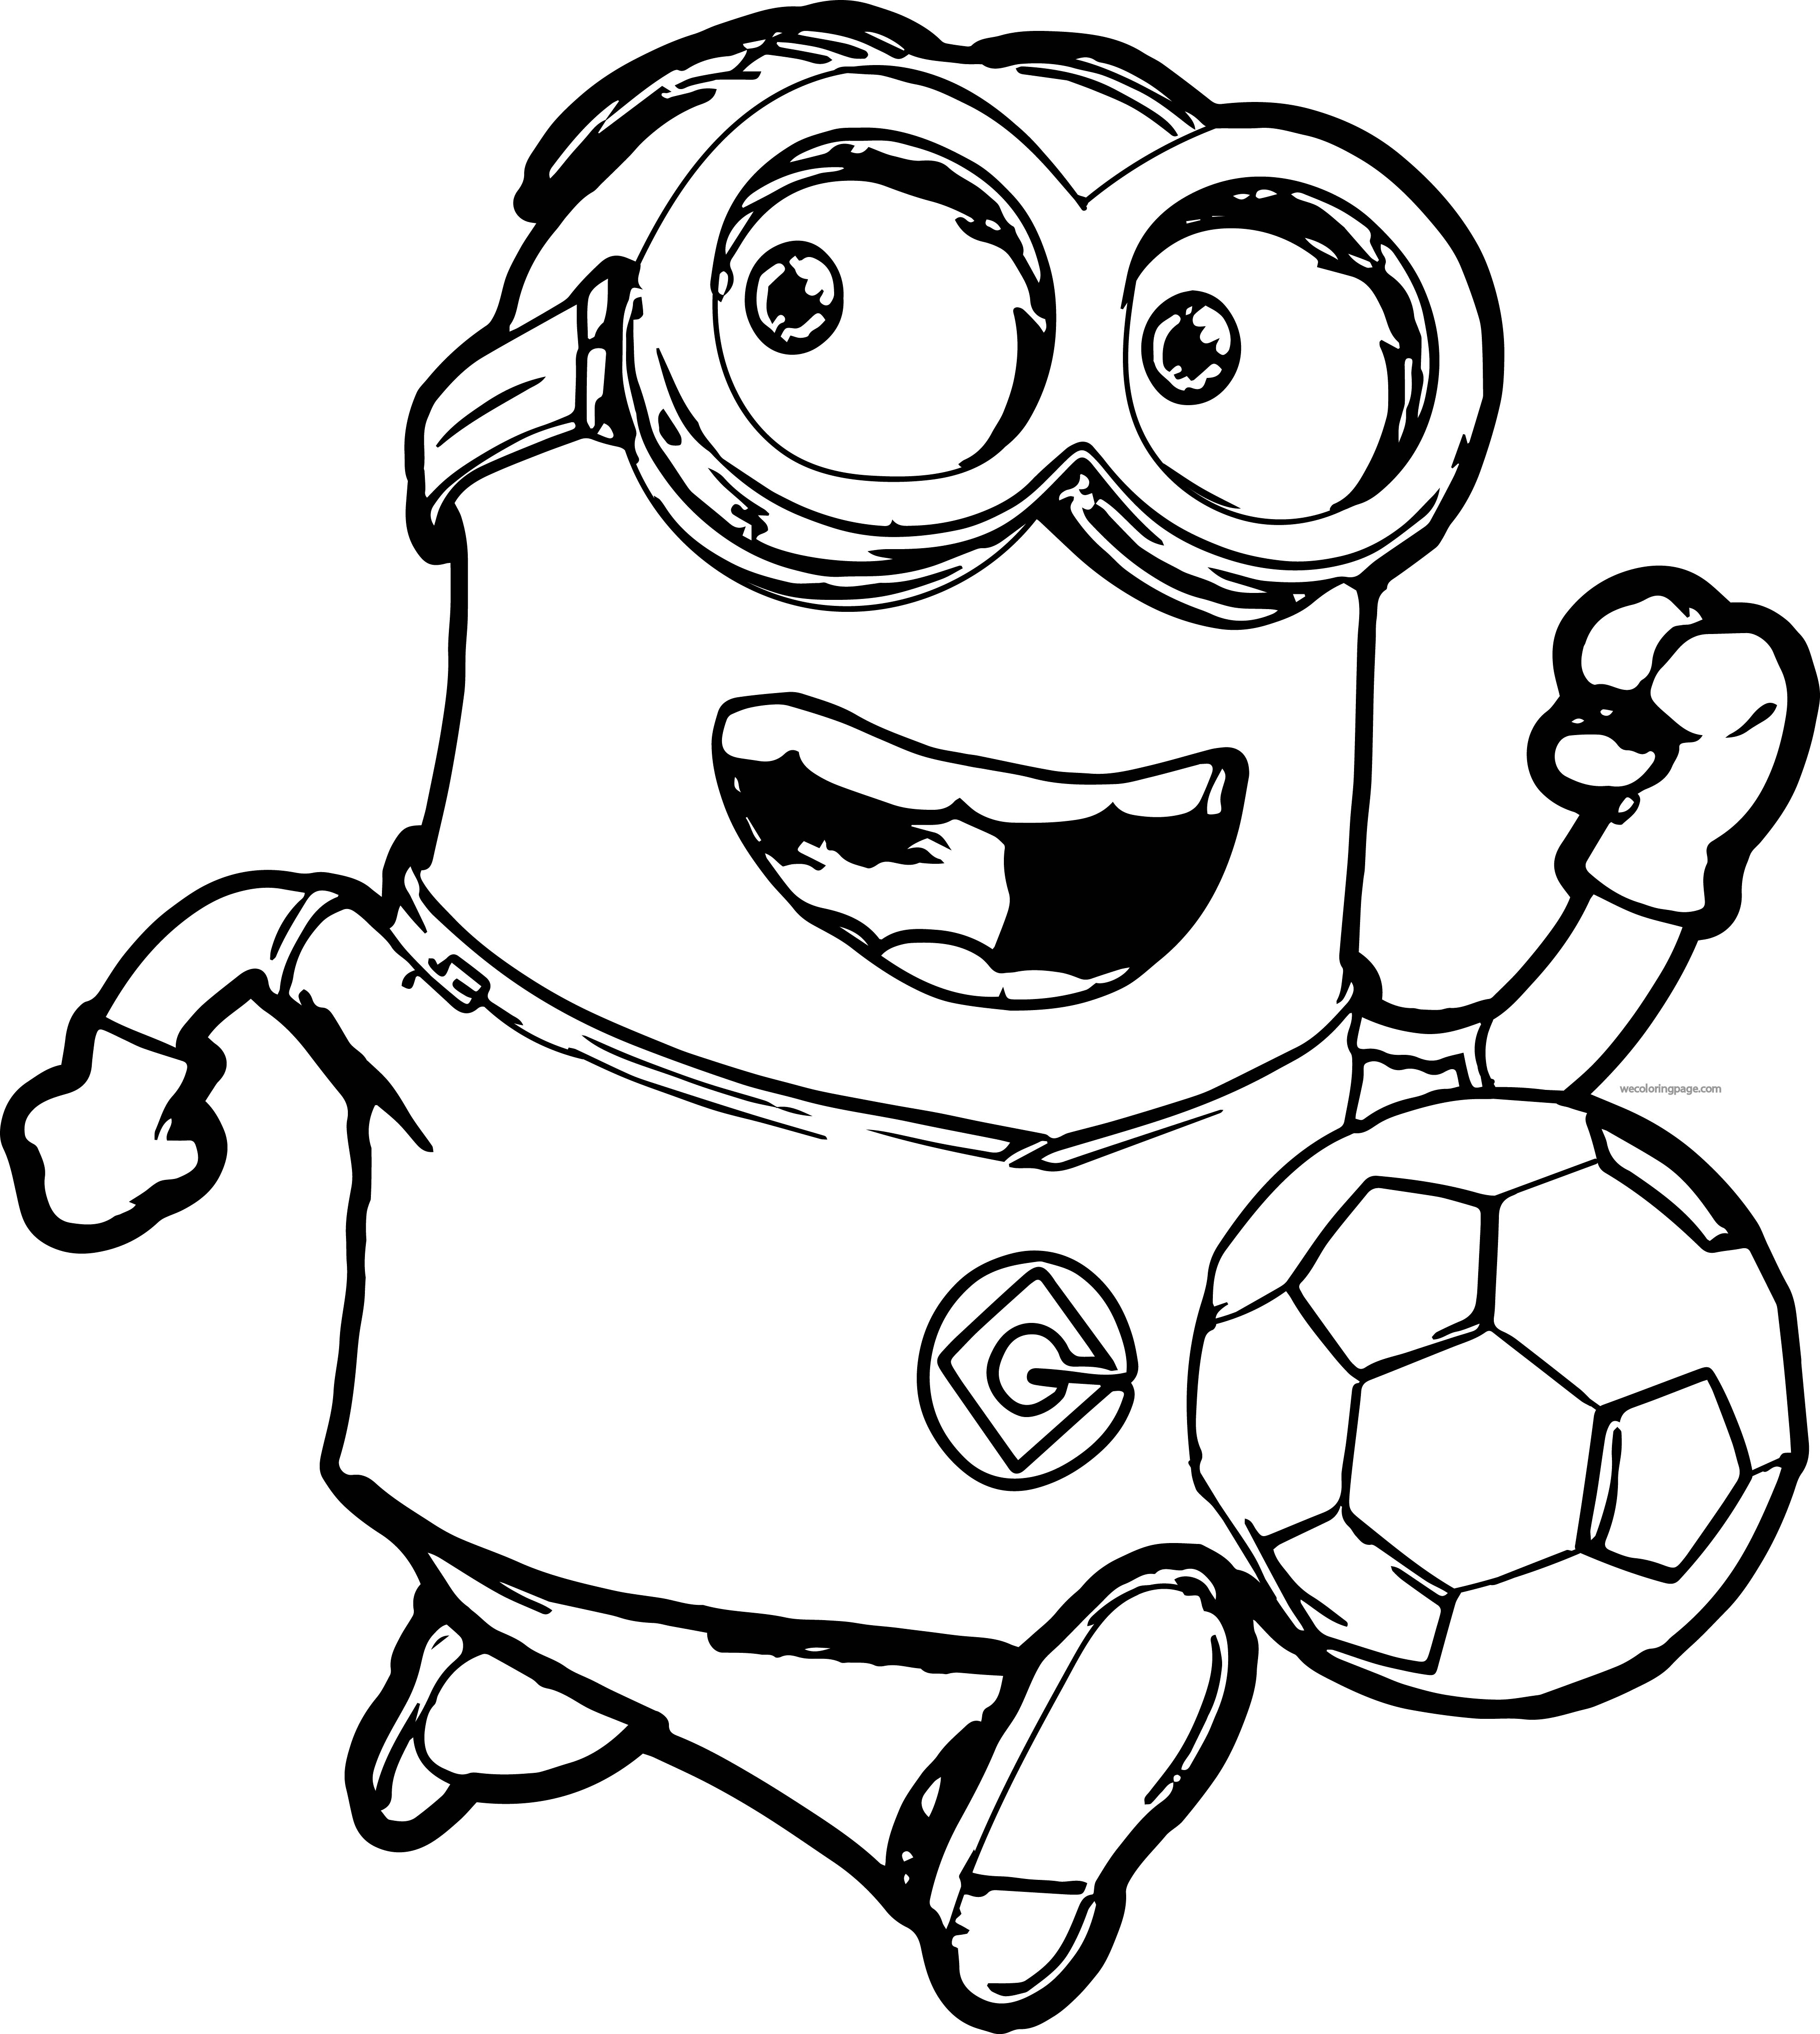 Minion Coloring Pages   Best Coloring Pages For Kids